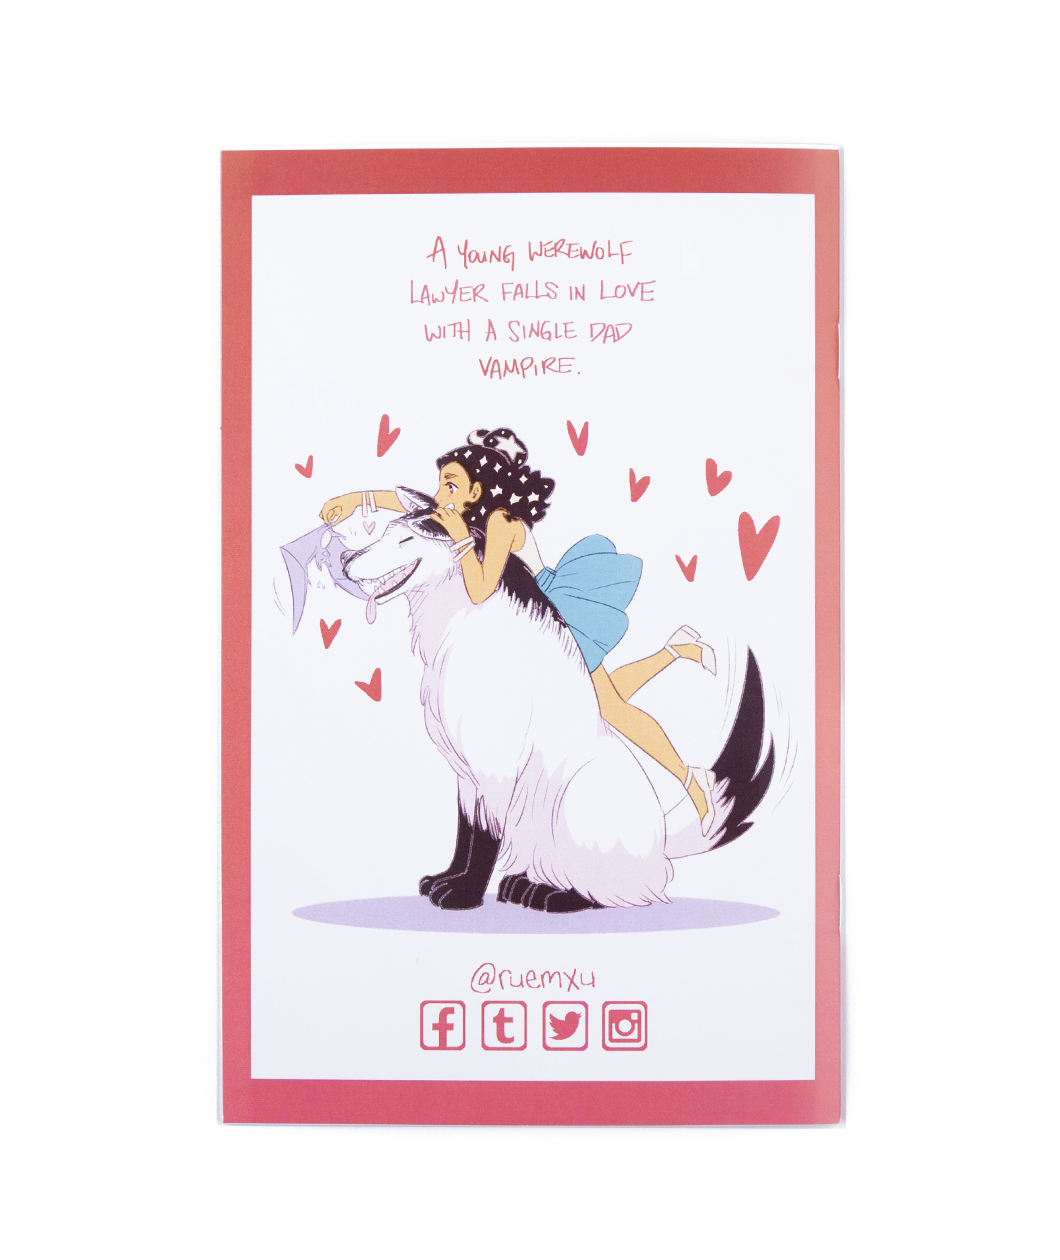 A print of a fancy lady on the back of a black and white dog with hearts around them. The text reads "A young werewolf lawyer falls in love with a single dad vampire."